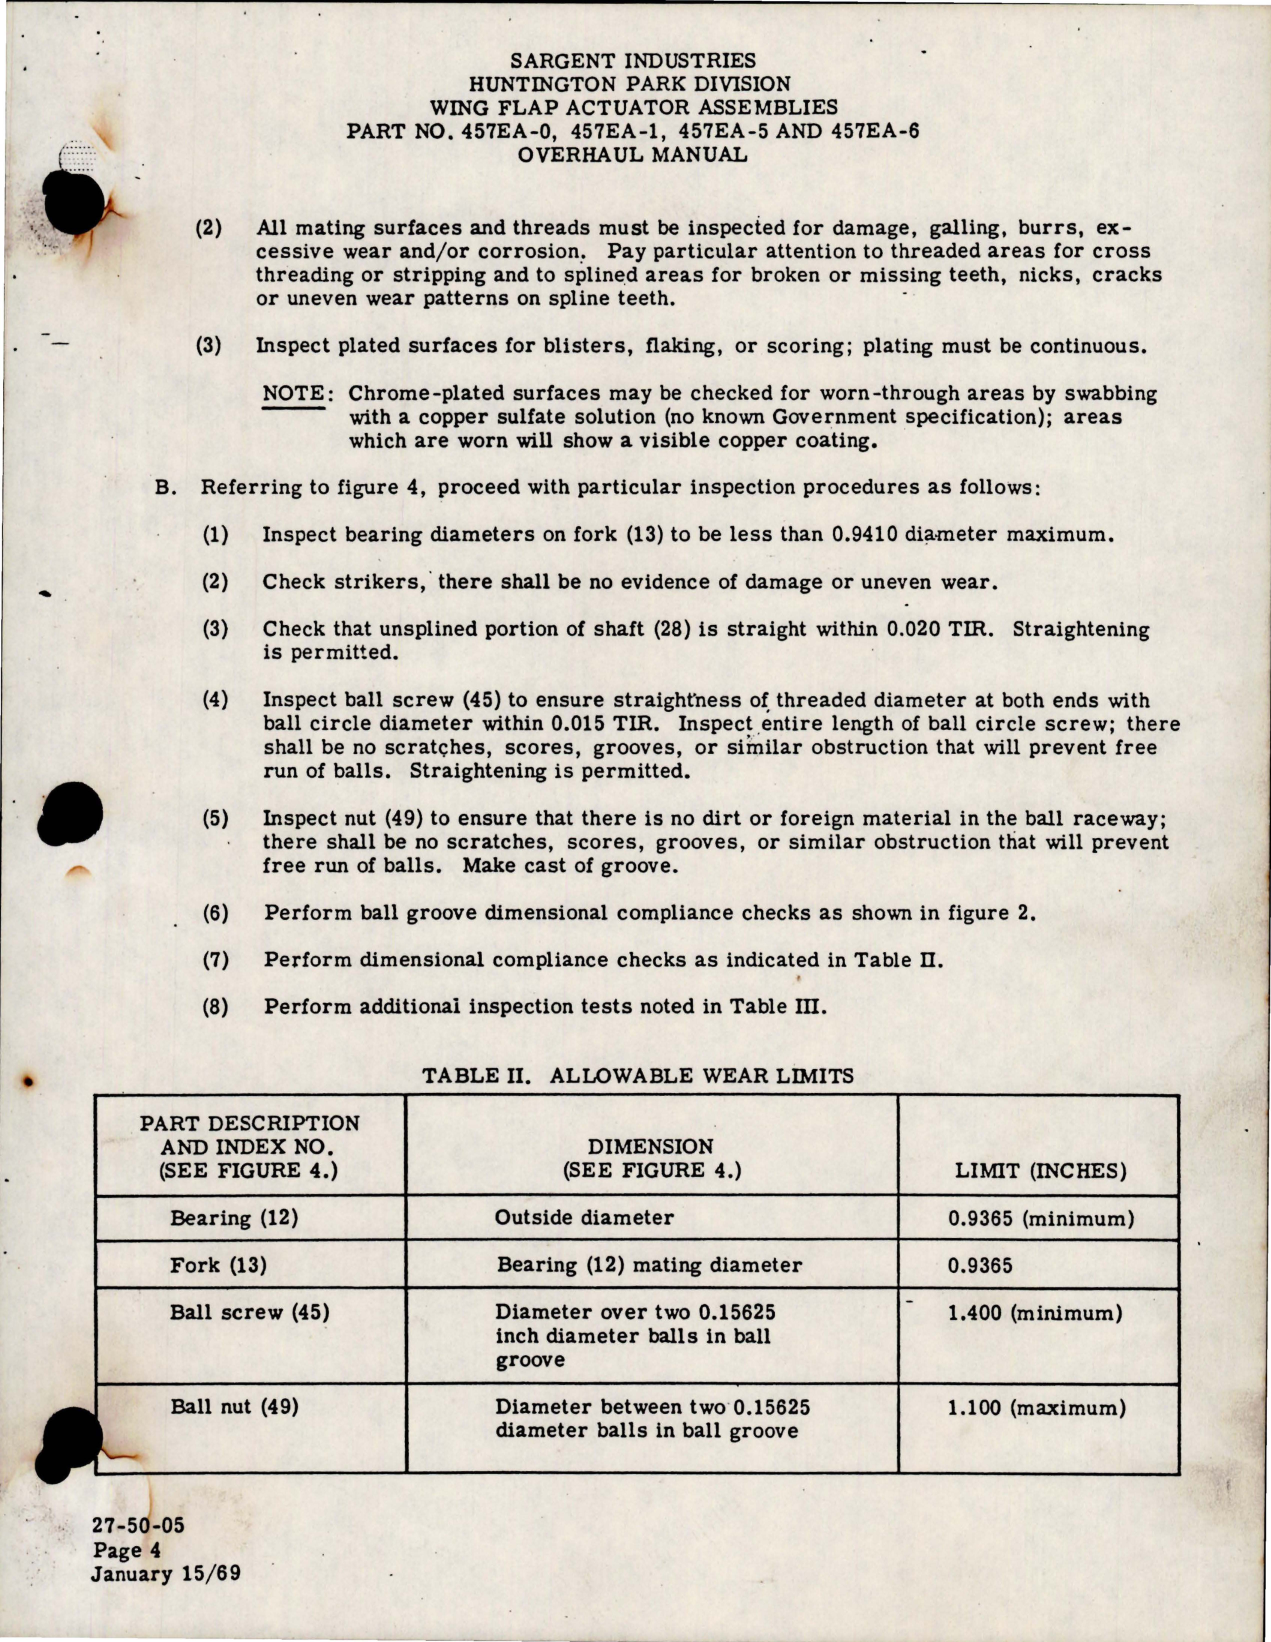 Sample page 5 from AirCorps Library document: Overhaul Manual for Wing Flap Actuator Assemblies